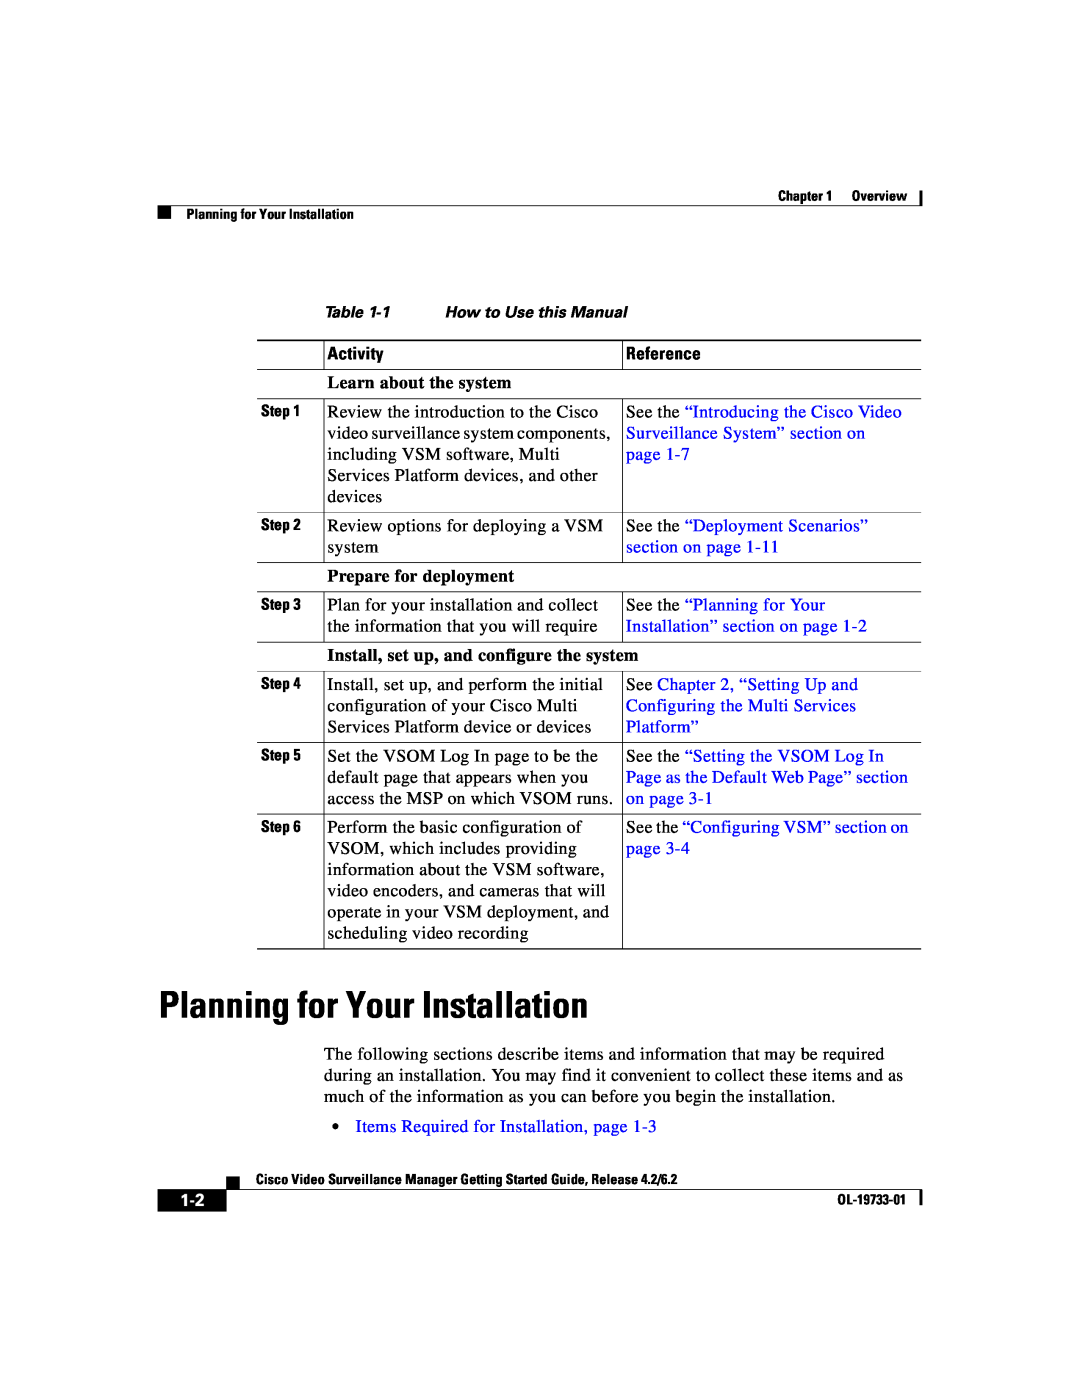 Cisco Systems 2 manual Planning for Your Installation, Activity, Reference, Learn about the system, section on page 